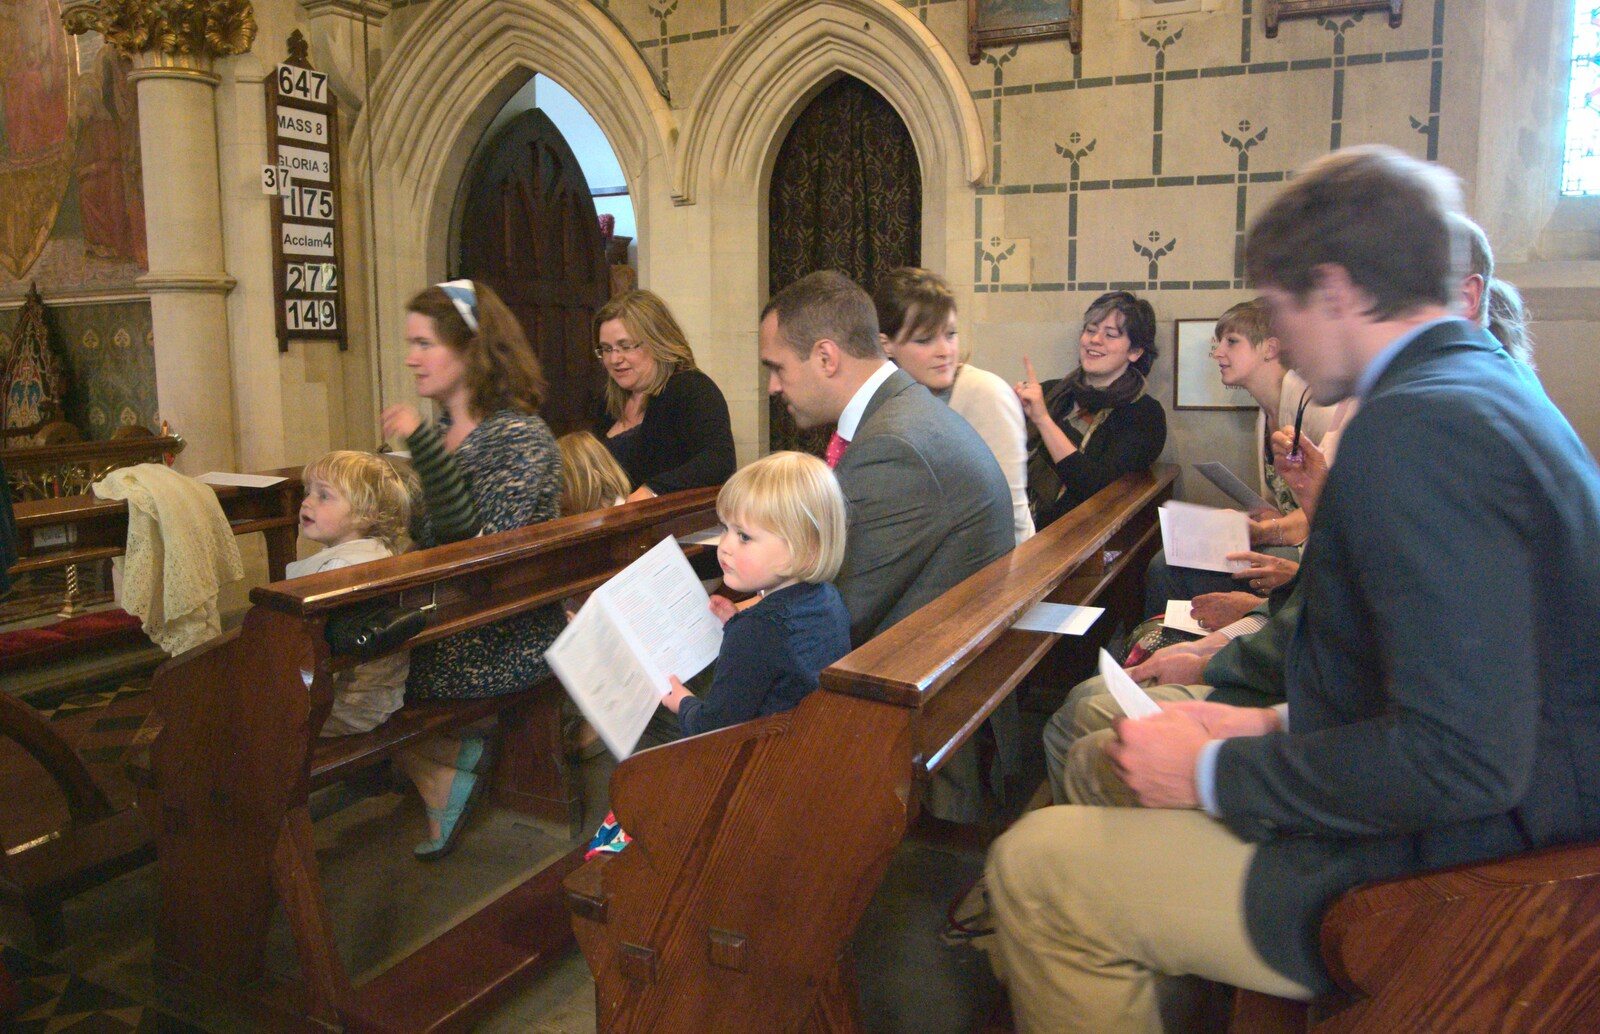 The assembled masses in the church from A Christening, Wilford, Northamptonshire - 22nd May 2011